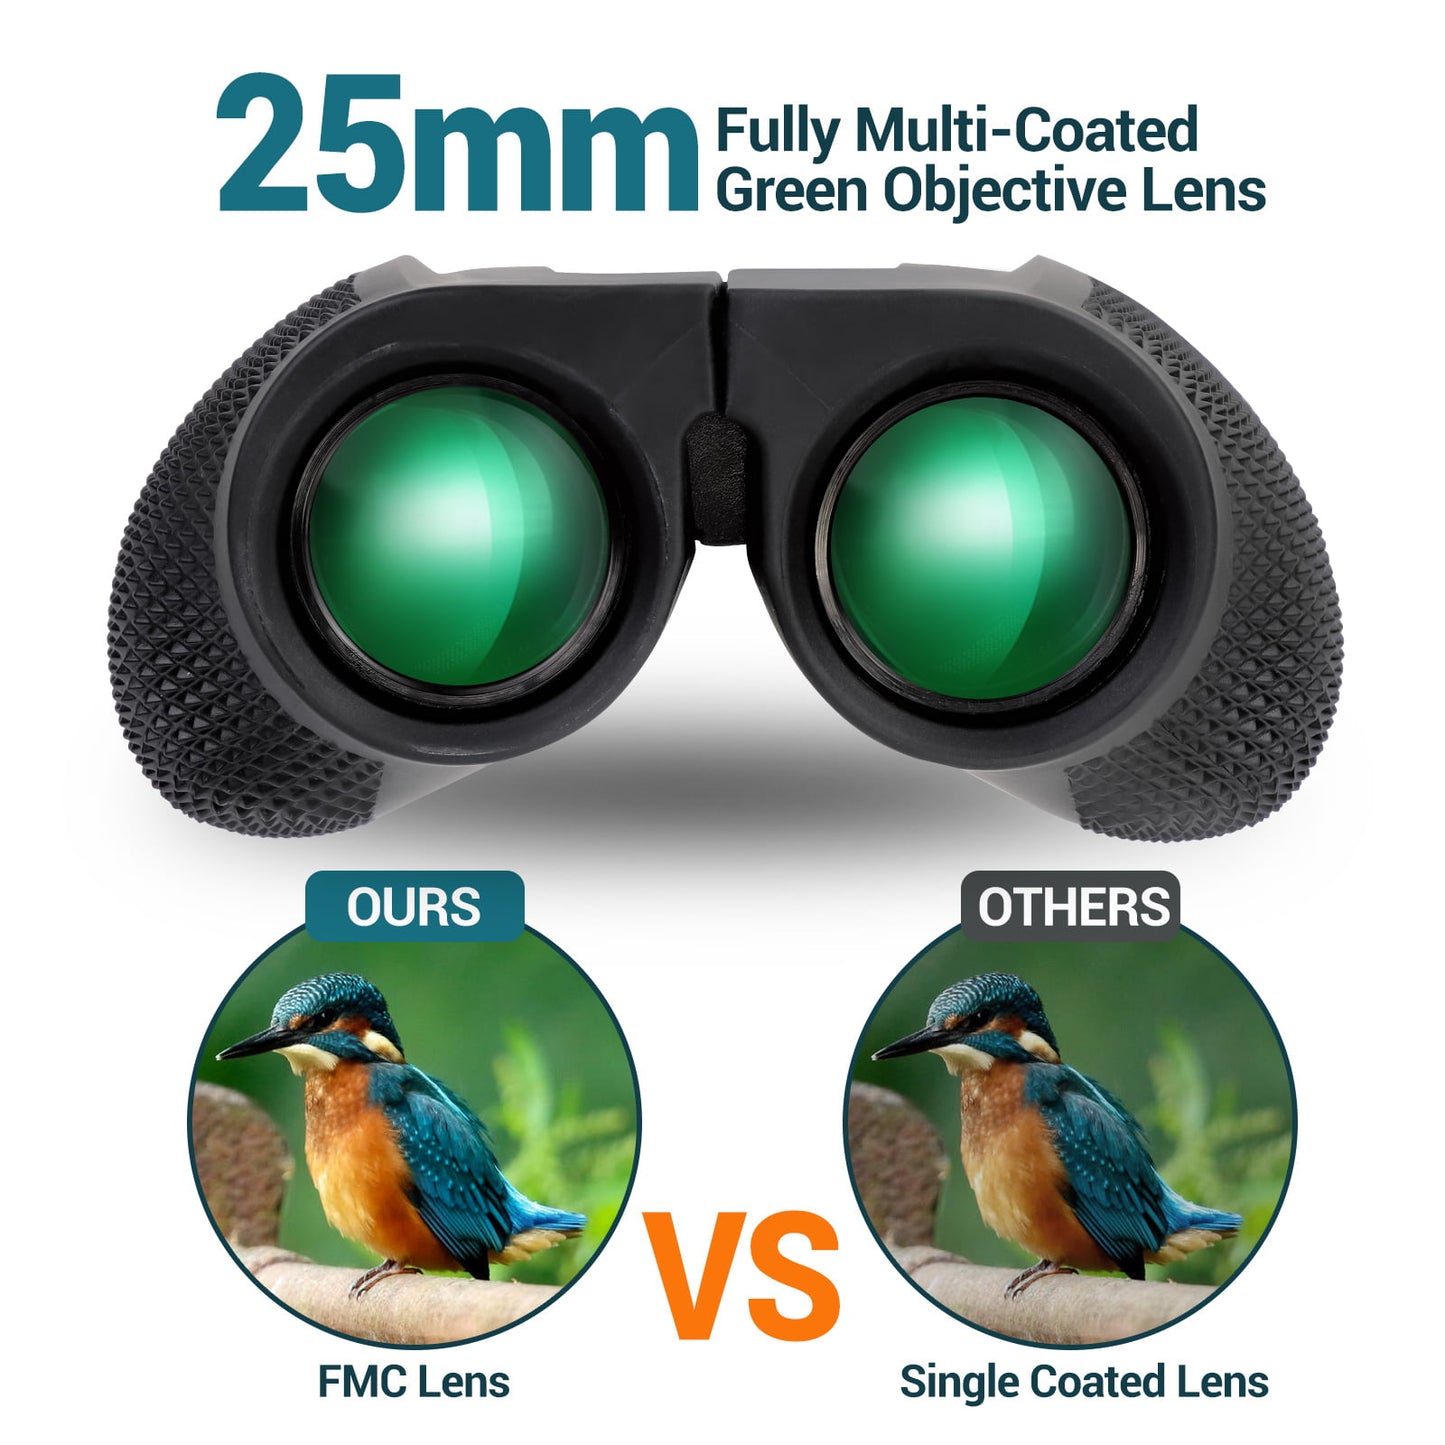 10x25 Bionculars for Adults and Kids, FMC Bak 4 Clear Vision Compact Binoculars for Bird Watching, Outdoor Viewing, Hunting, Theater and Concerts and Sport Games